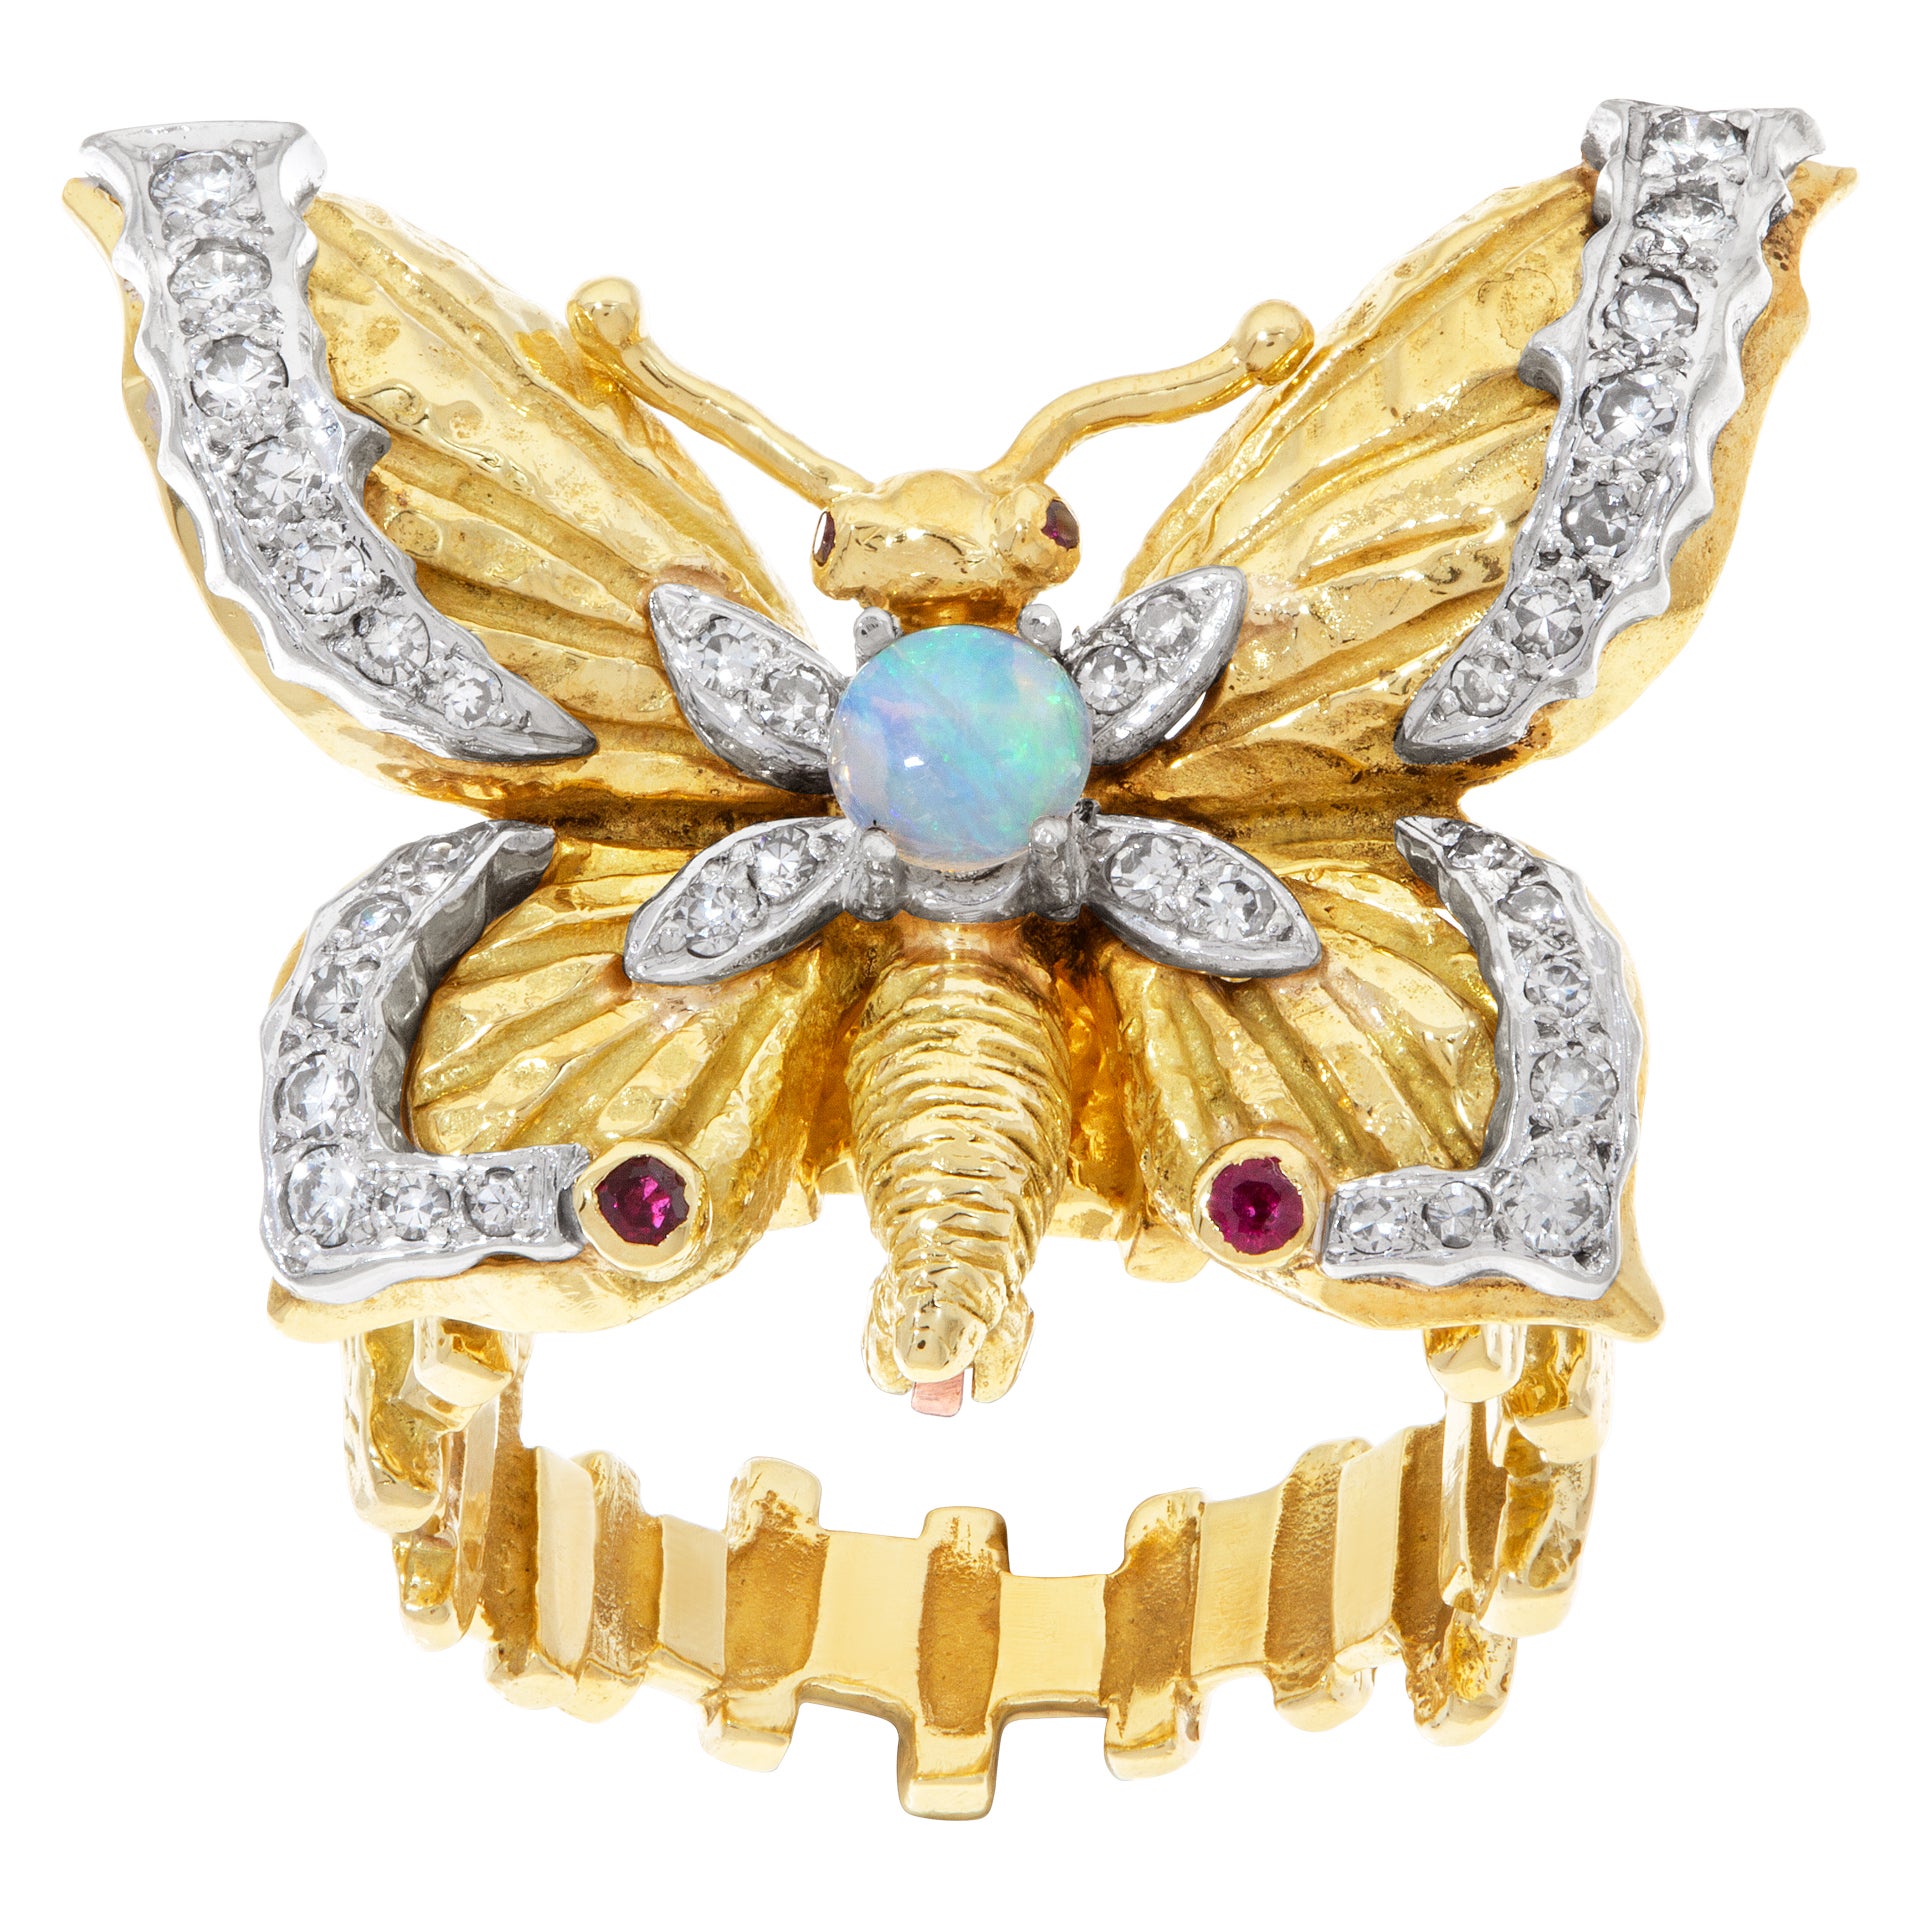 Beautiful Butterfly Ring with Diamond Accents, Rubies and Center Opal in 18k